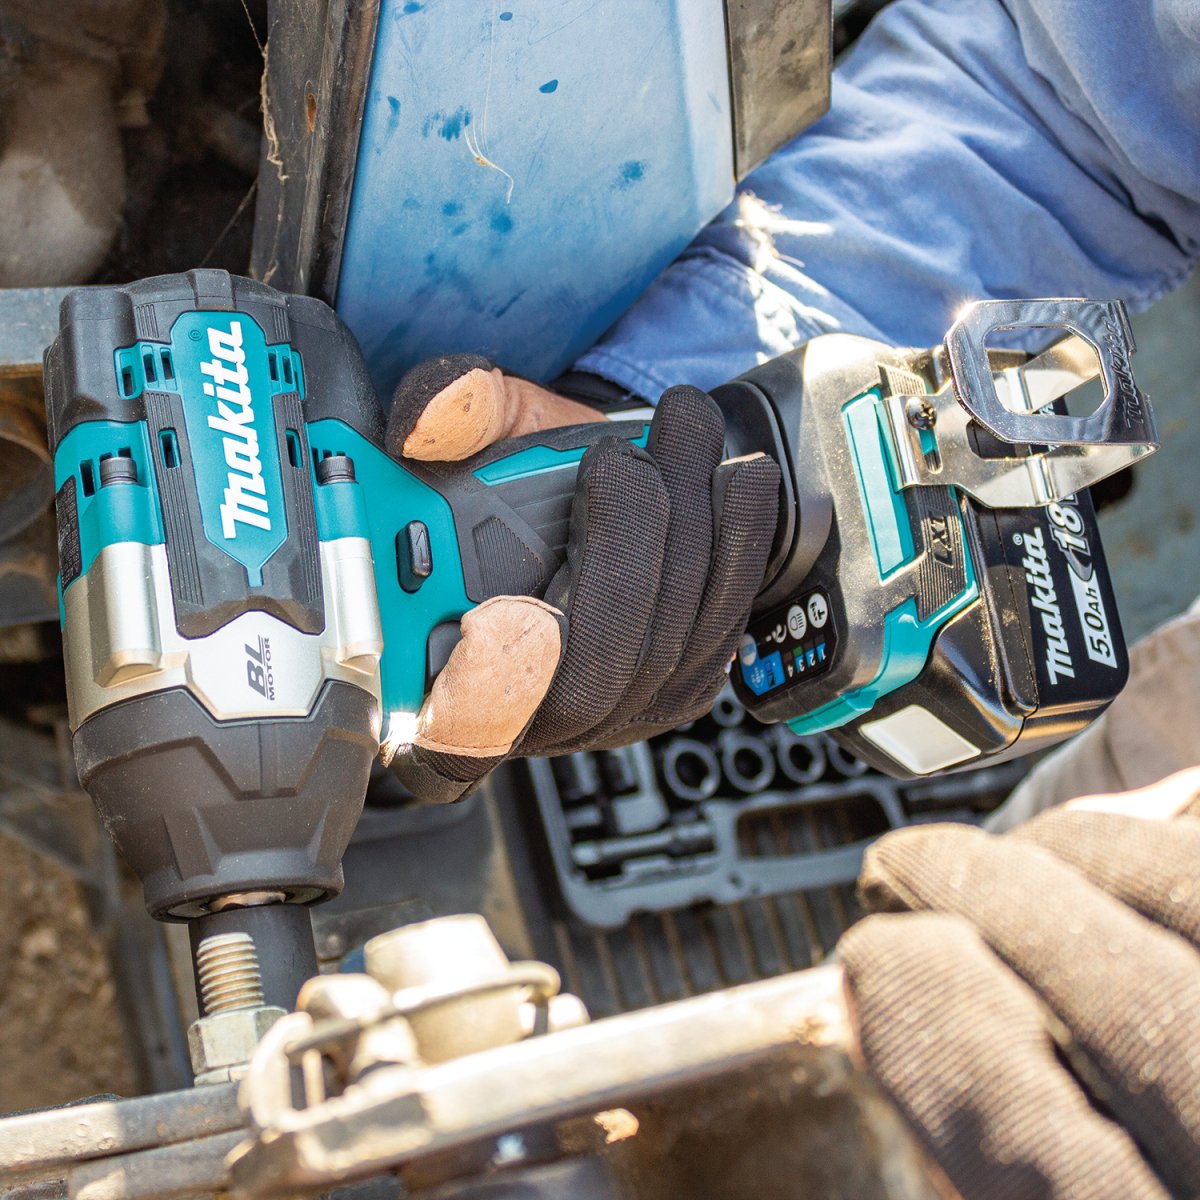 18V LXT® Lithium‑Ion Brushless Cordless 4‑Speed Mid‑Torque 1/2" Sq. Drive Impact Wrench w/ Detent Anvil - Diamond Tool Store